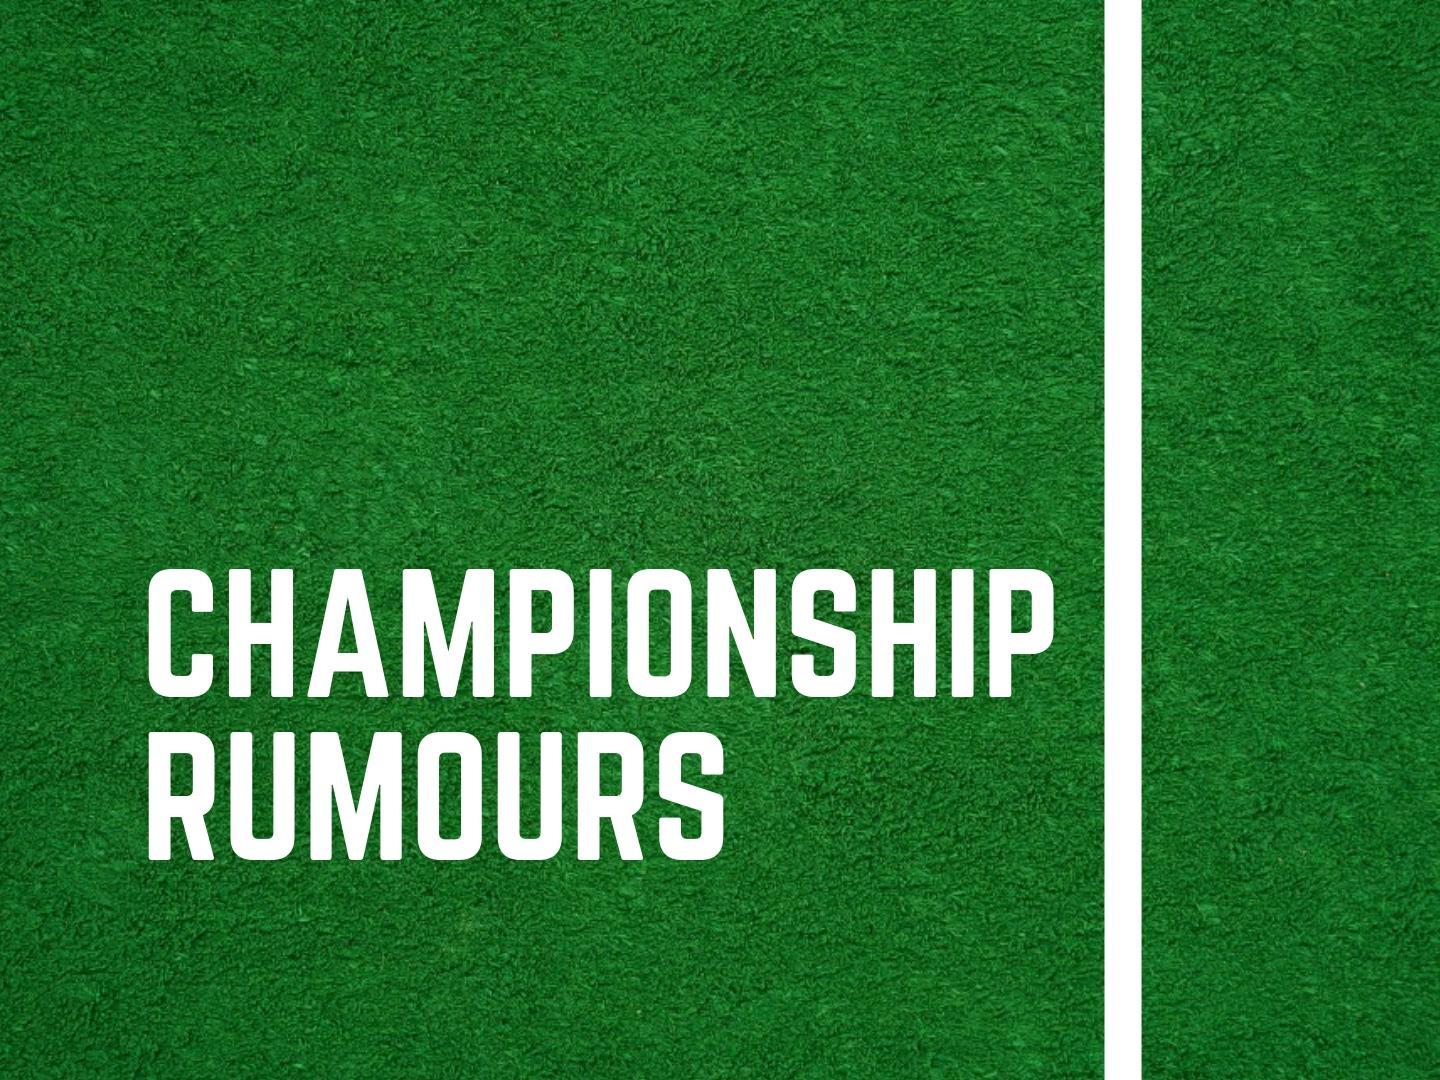 All of the latest Championship rumours from around the web.